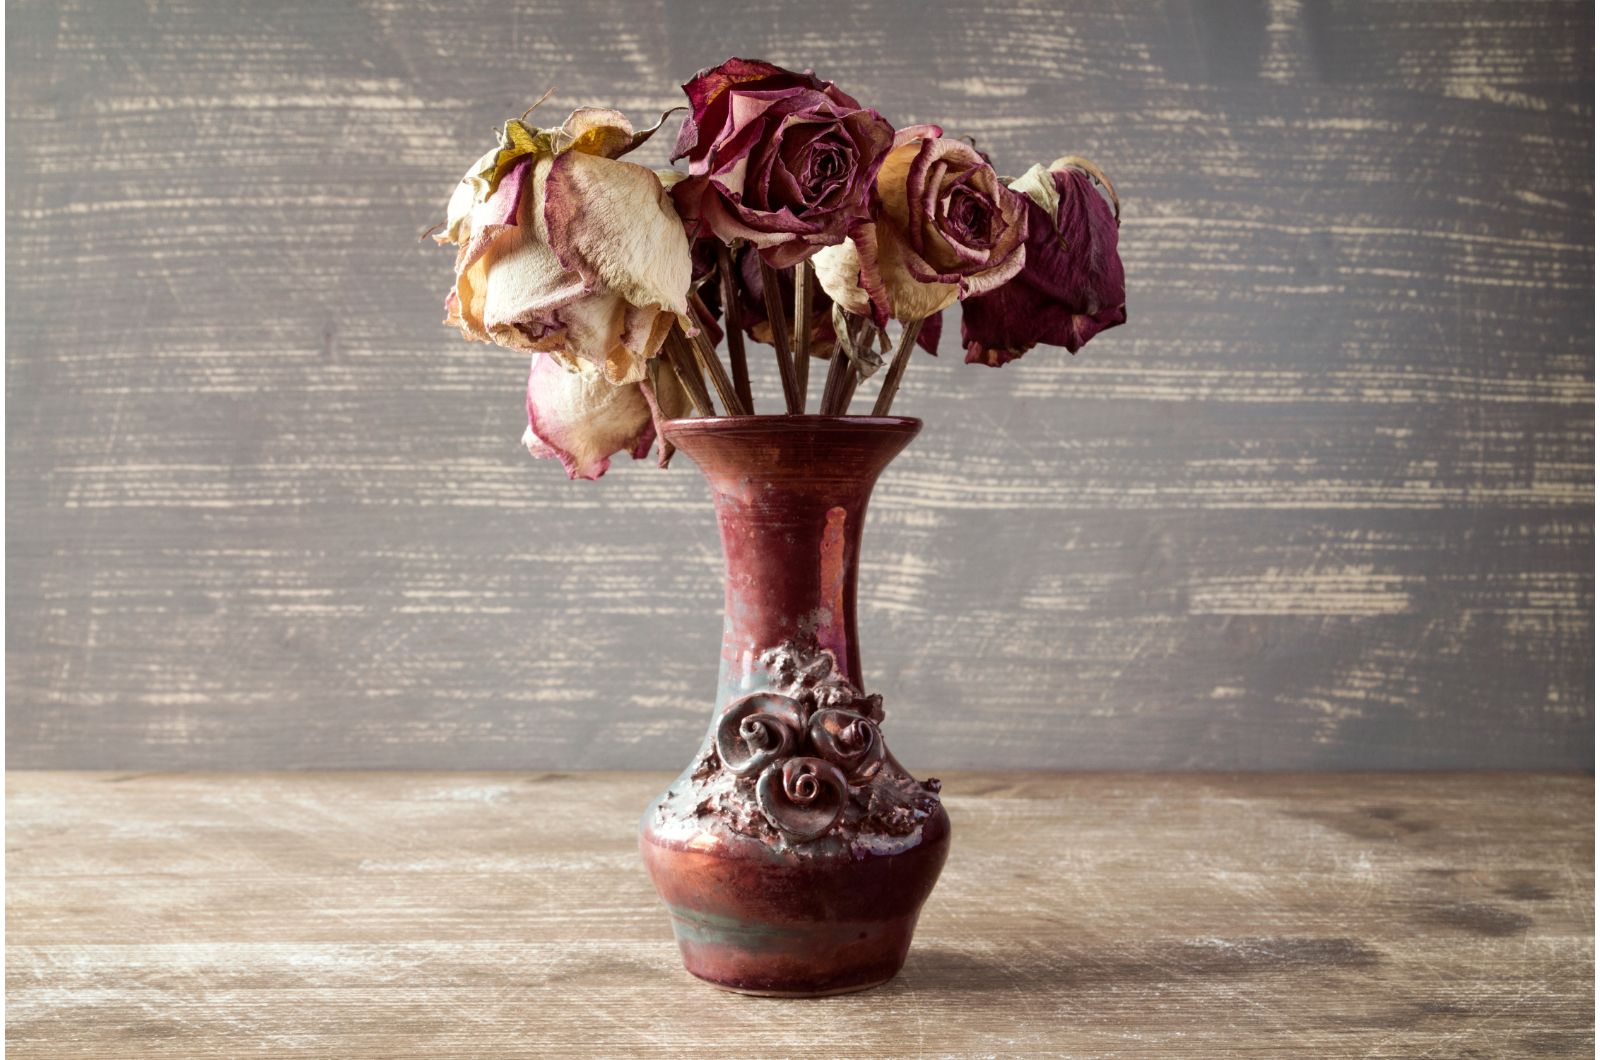 Dry roses in a vase